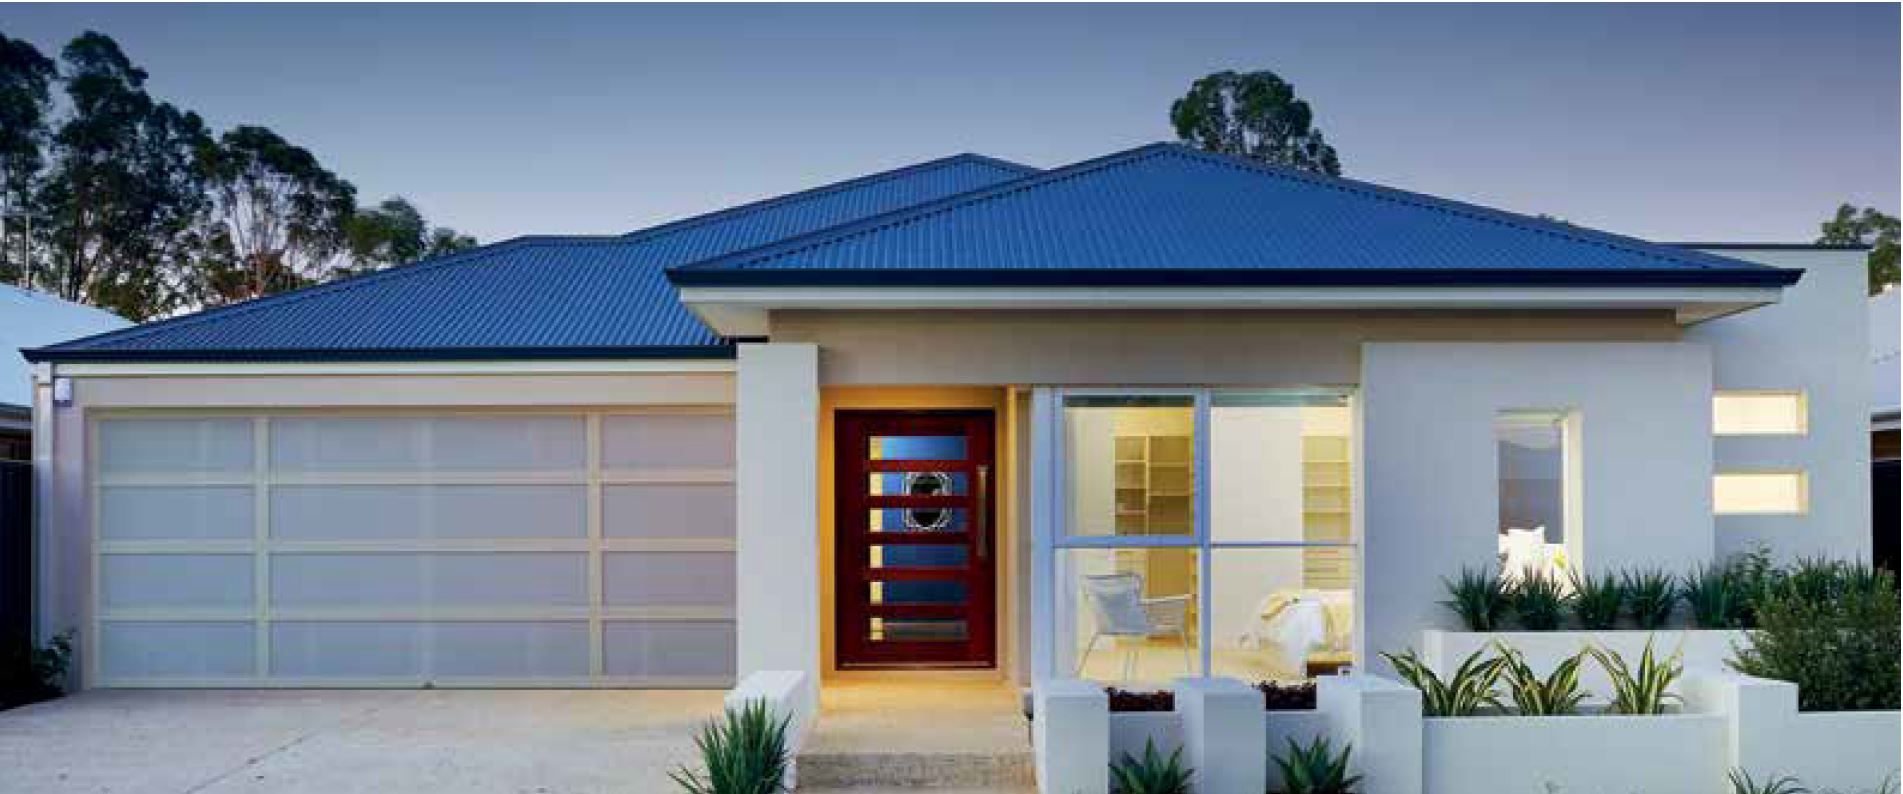 4 bedrooms New House & Land in Lot 137 Scenograph Drive SINAGRA WA, 6065